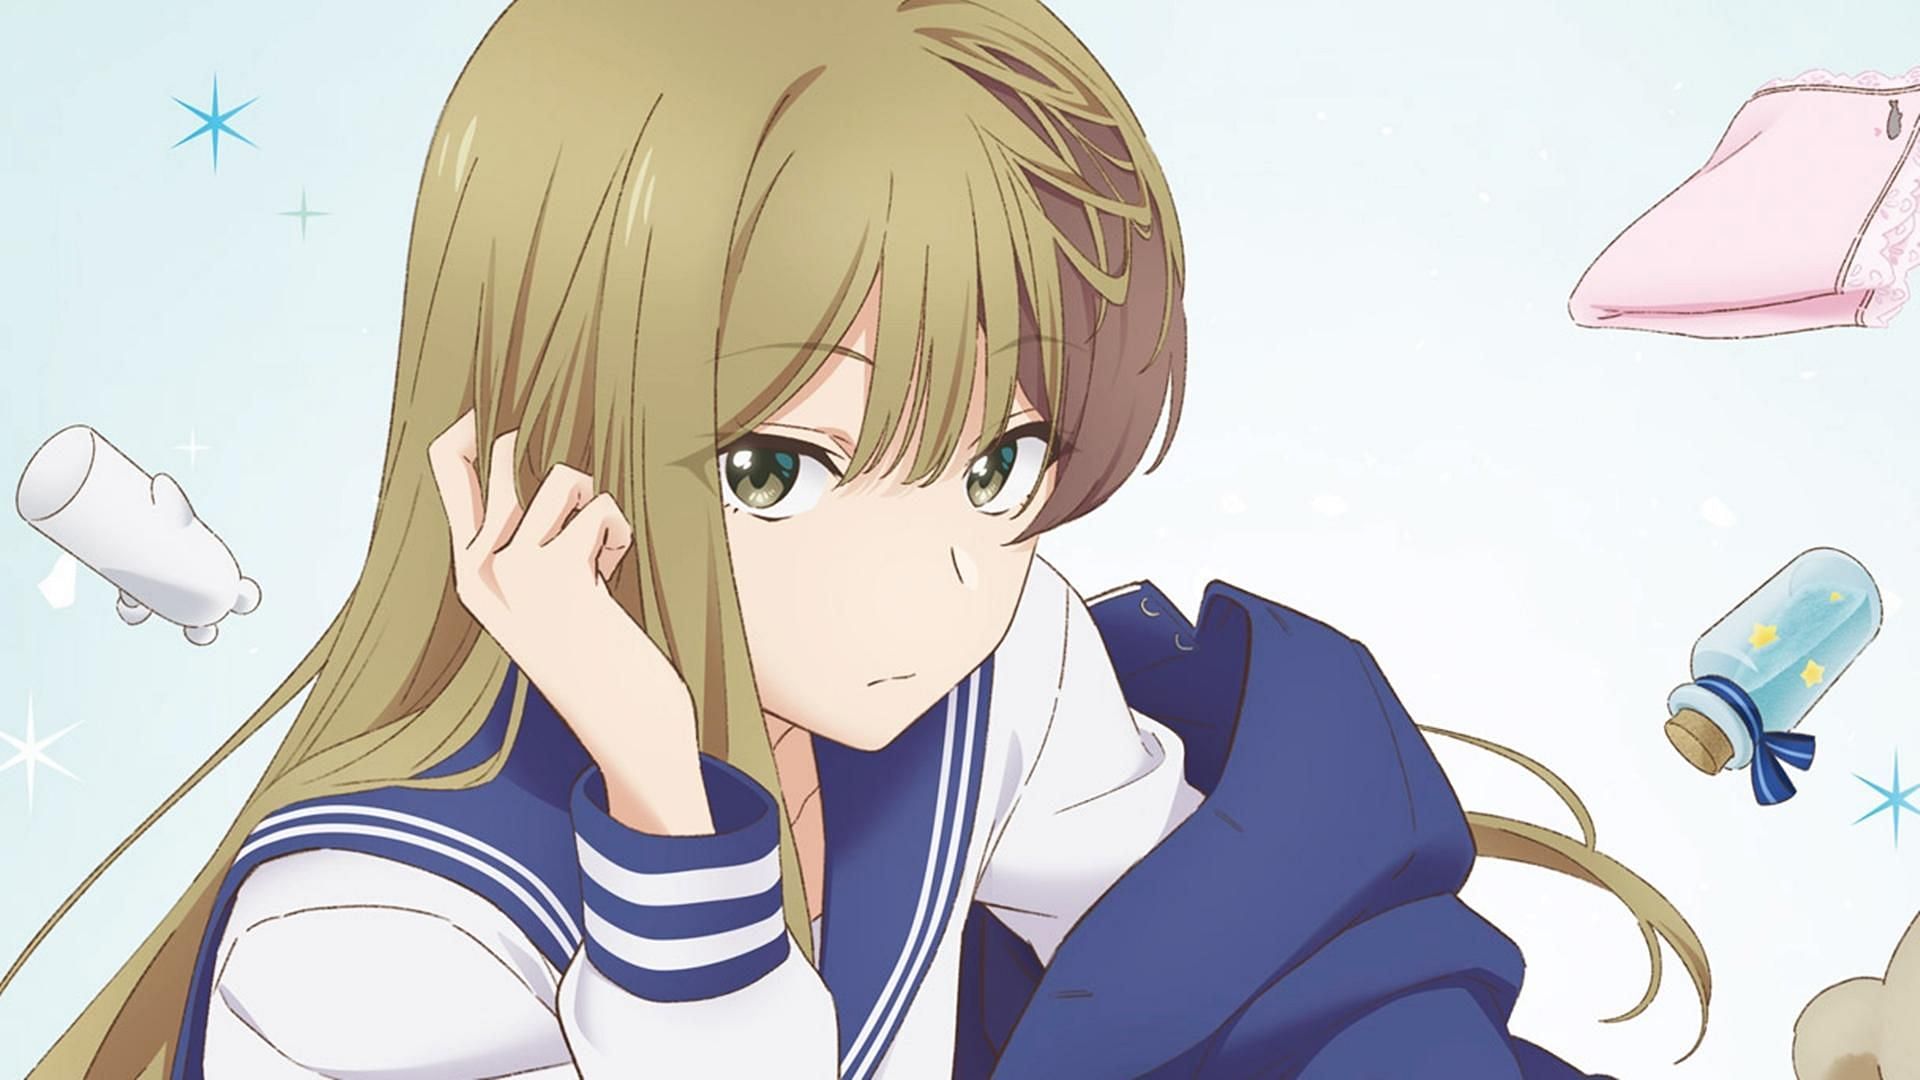 Senpai Is an Otokonoko episode 1 will likely focus exclusively on protagonist Makoto (Image via project No. 9)